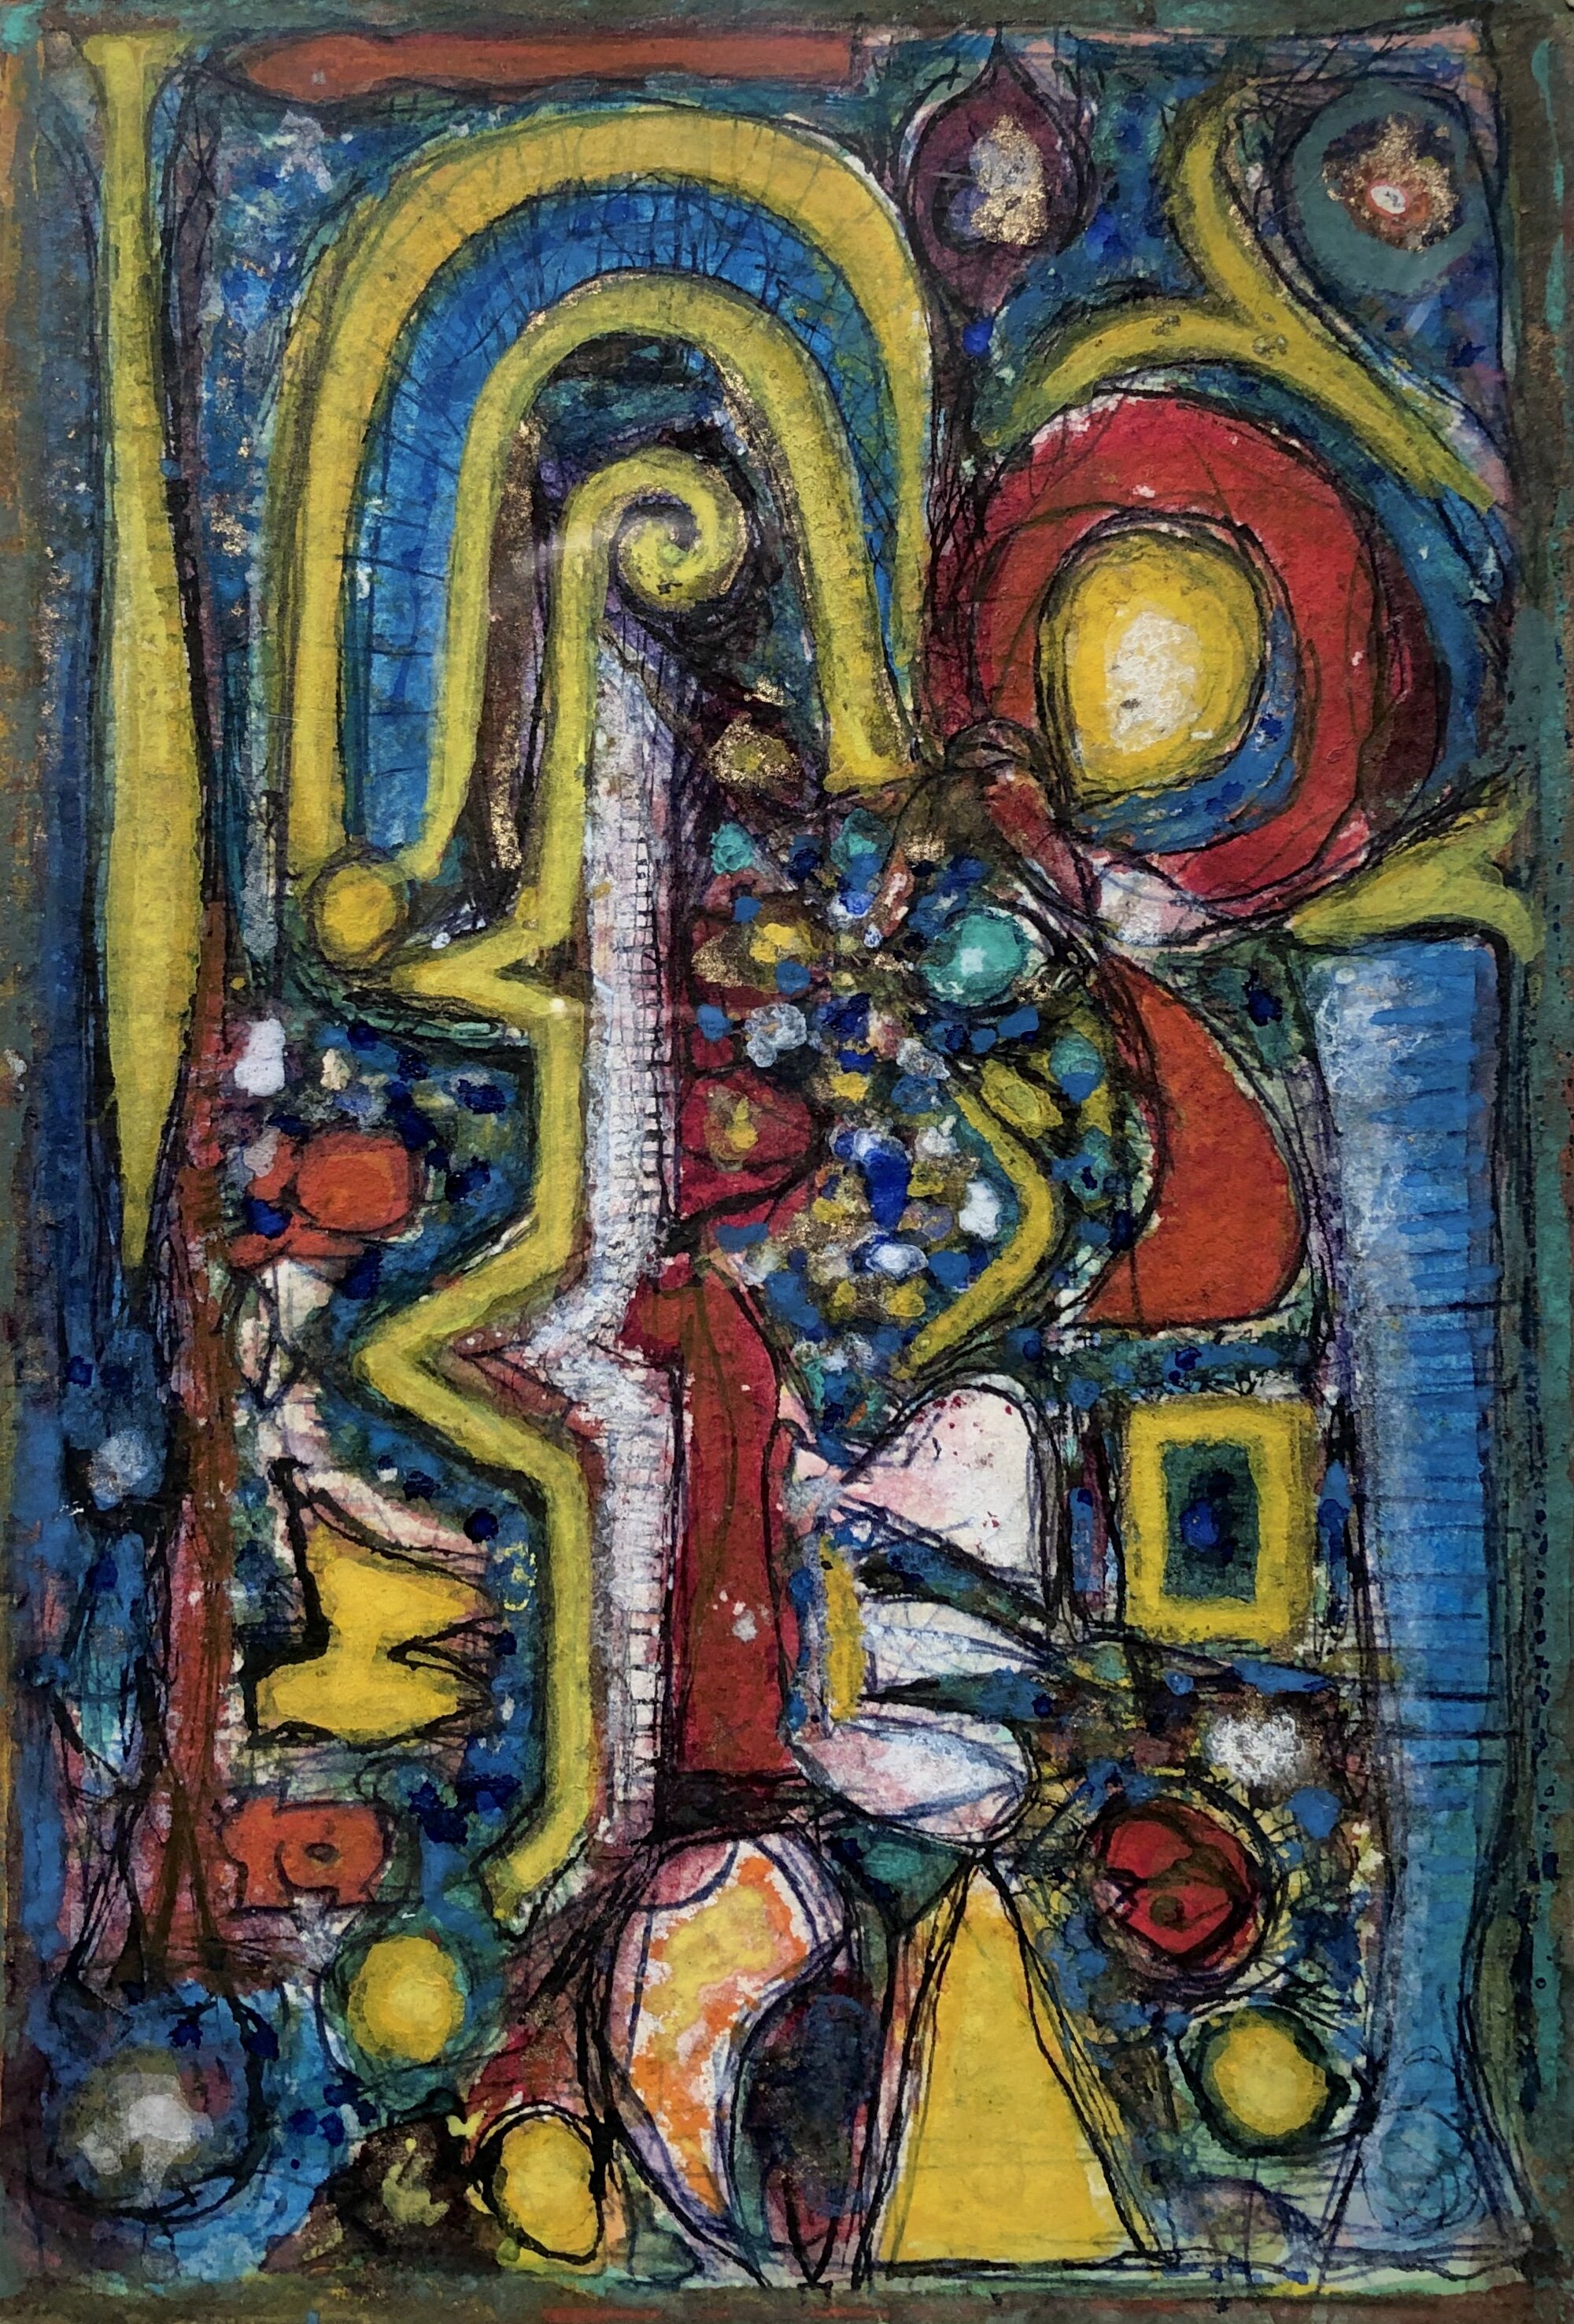 Abstract gouache layered with ink of geometric shapes and curves with dots of color in yellow, blue, red, and white